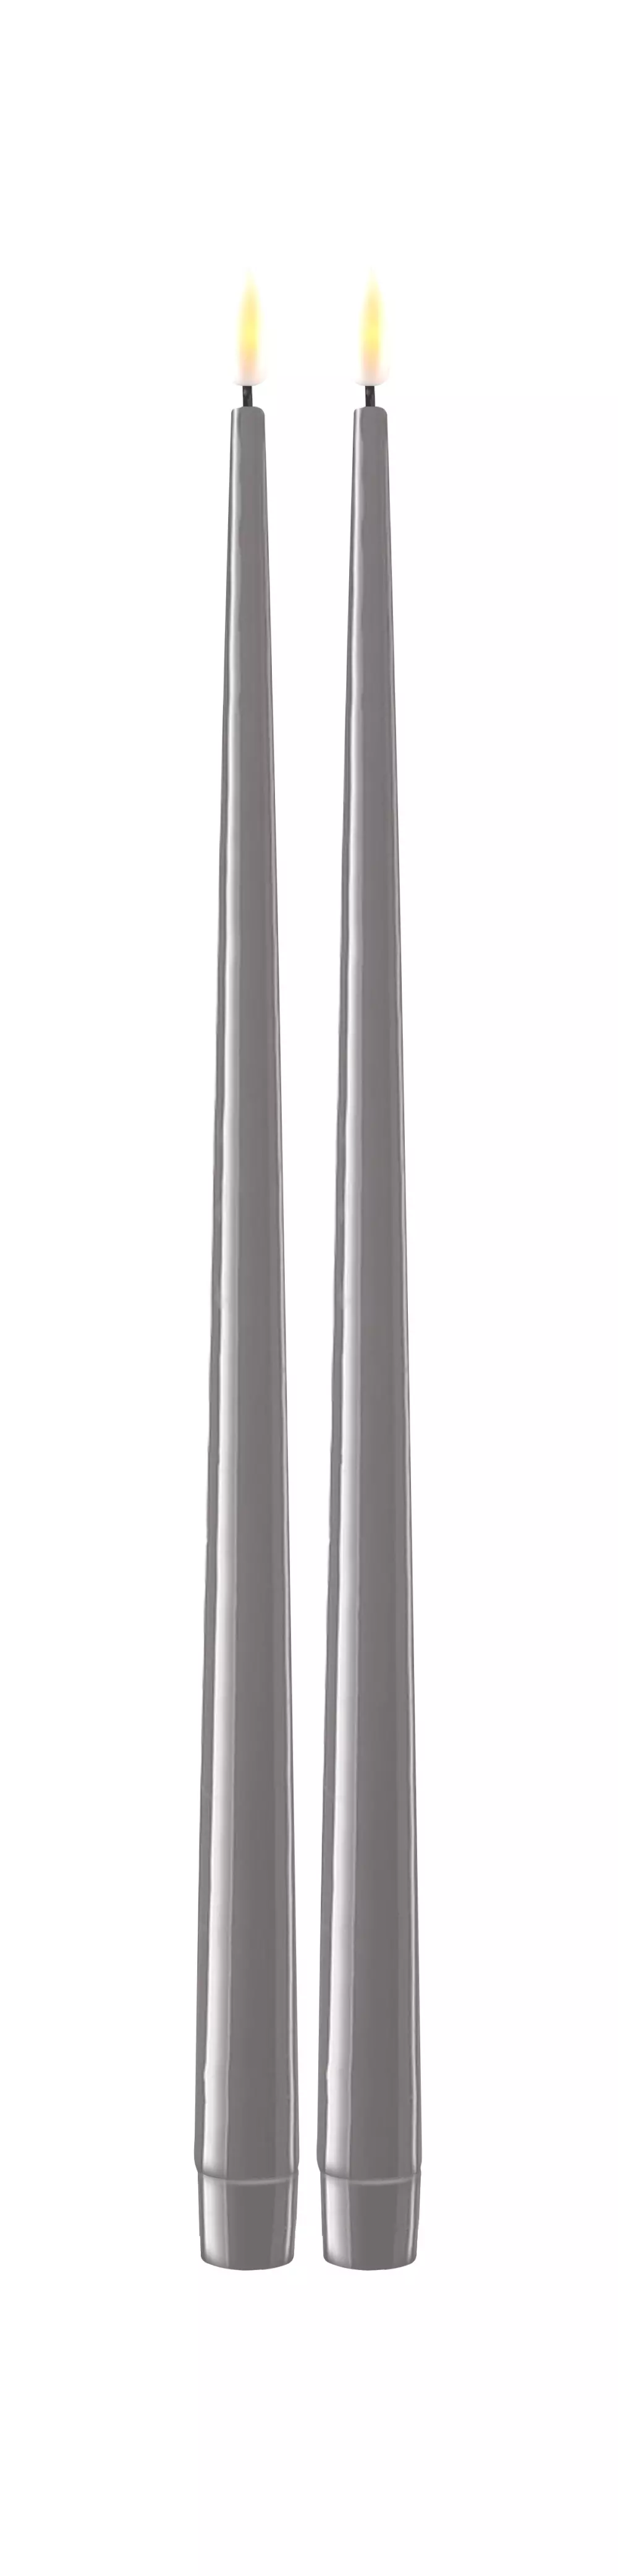 Deluxe Kronelys Grå 38cm 2pk, 5744001241349, RF-K-0006, Interiør, Lys, Deluxe Homeart, Real Flame Shiny Dinner candle 2 pcs (38 cm) Grey